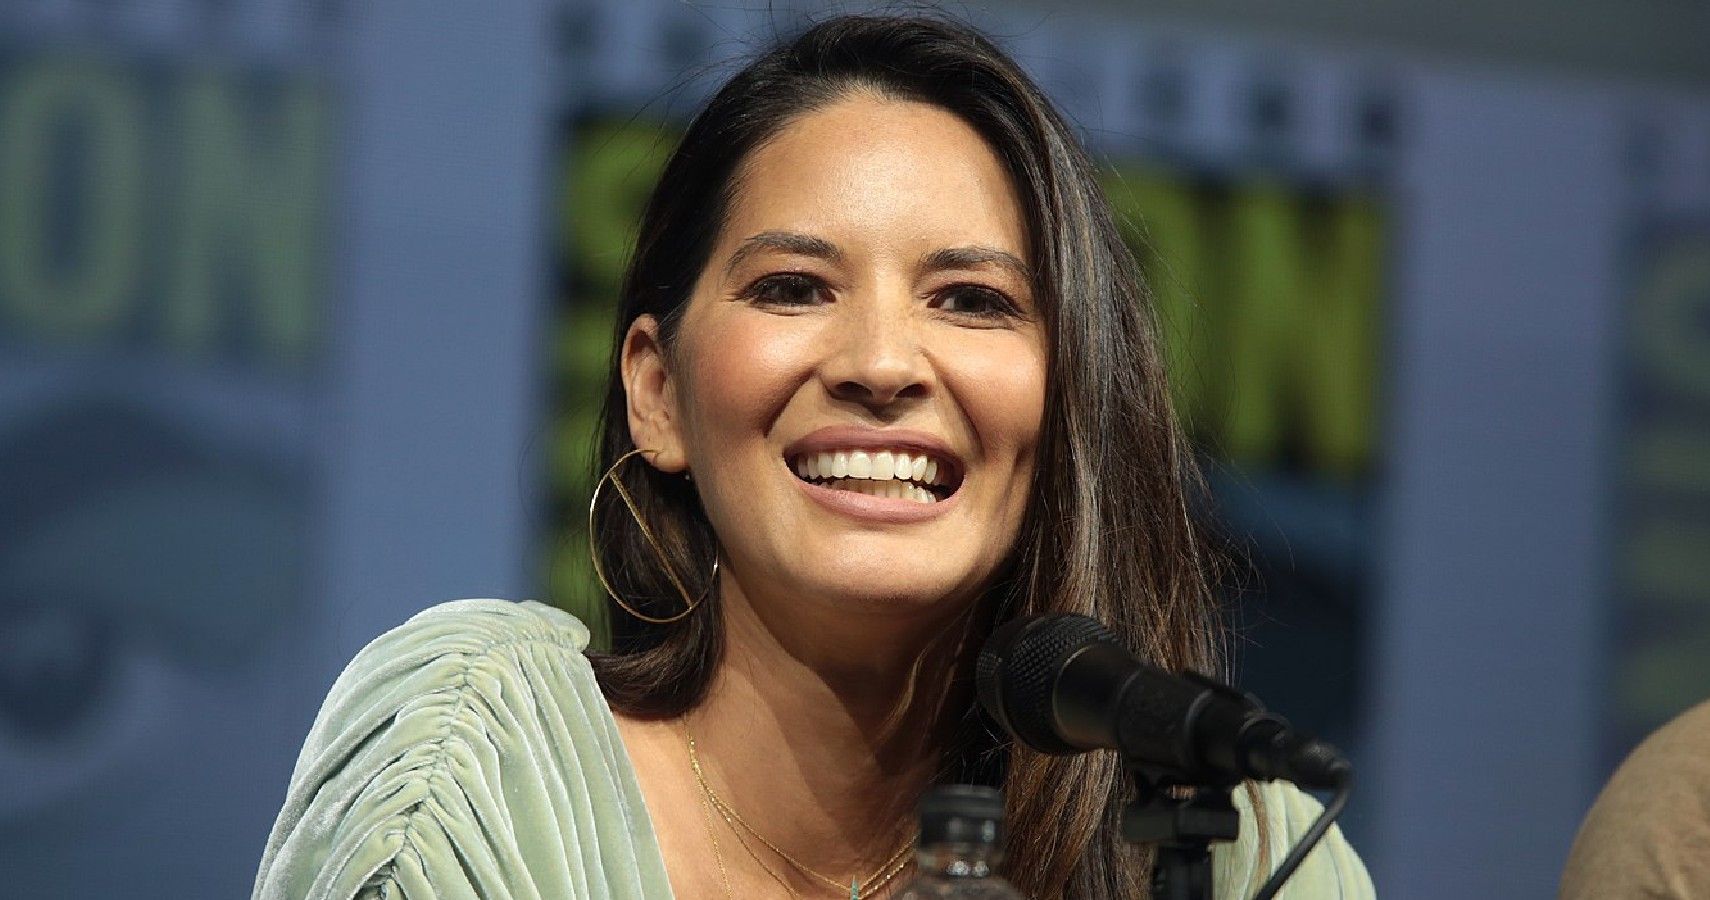 Olivia Munn’s Son Displays Cute Dimples In New Photos